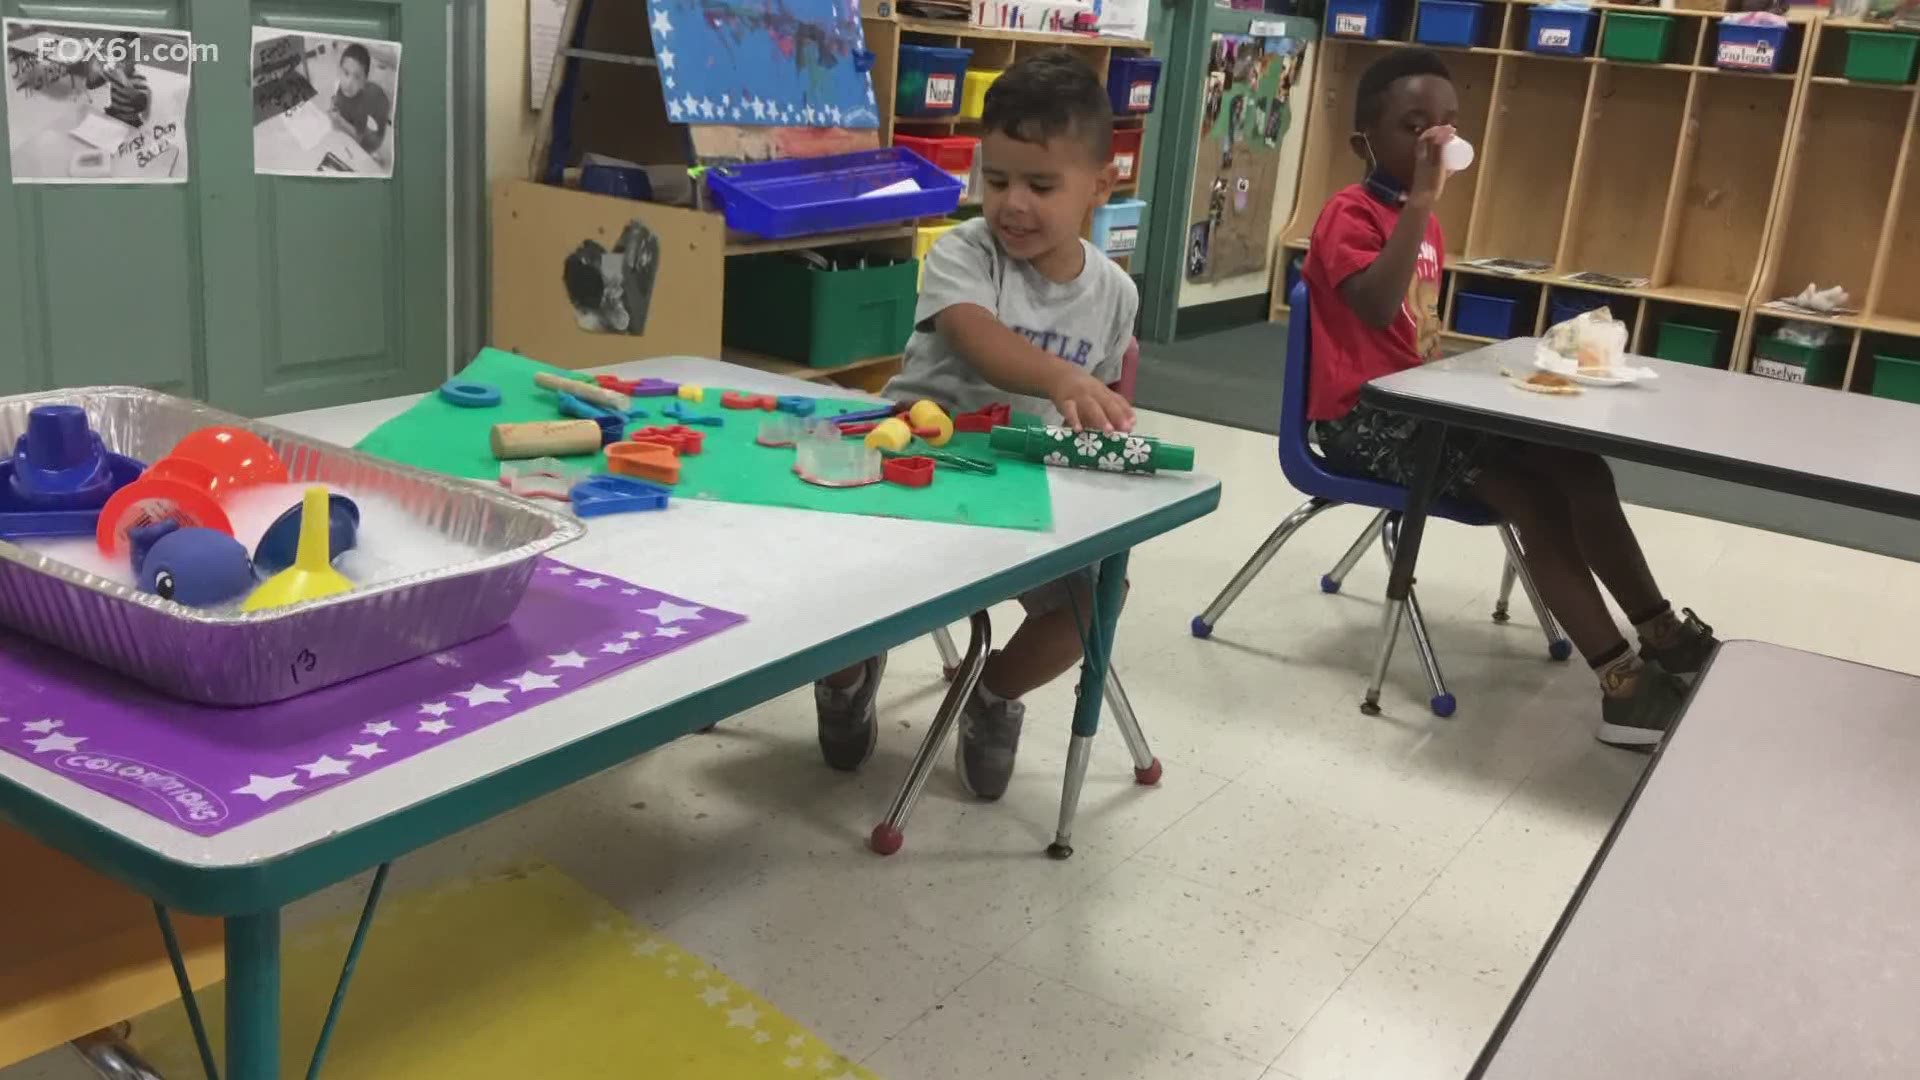 Officials say some centers couldn't afford to keep their staff and they don't have the resources. So there's a shortage of child care spaces for working parents.